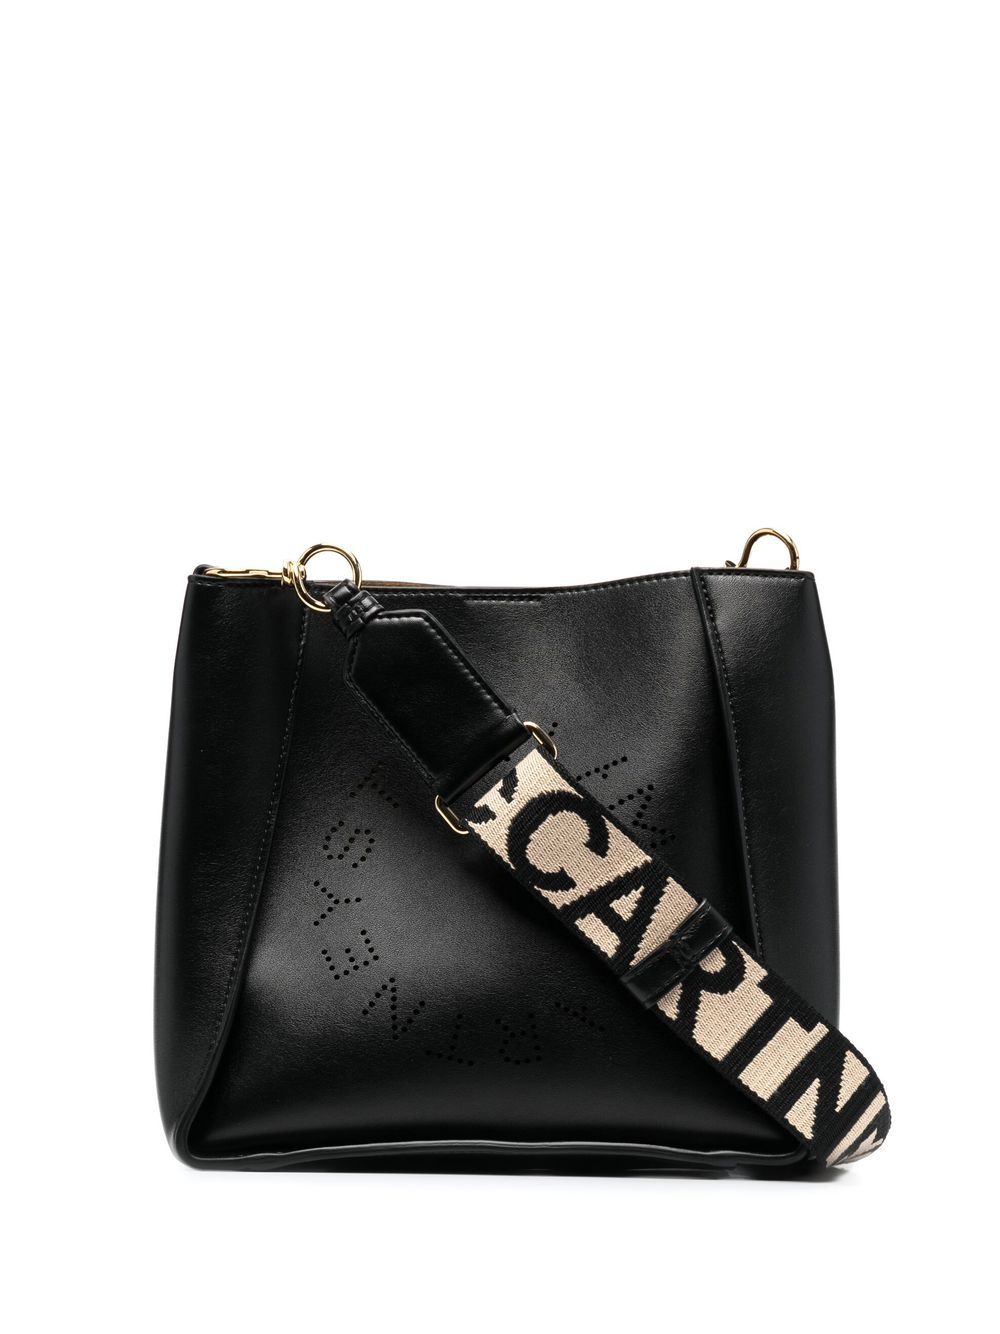 STELLA MCCARTNEY Mini Black Faux Leather Crossbody Bag with Perforated Logo and Gold-Tone Accents